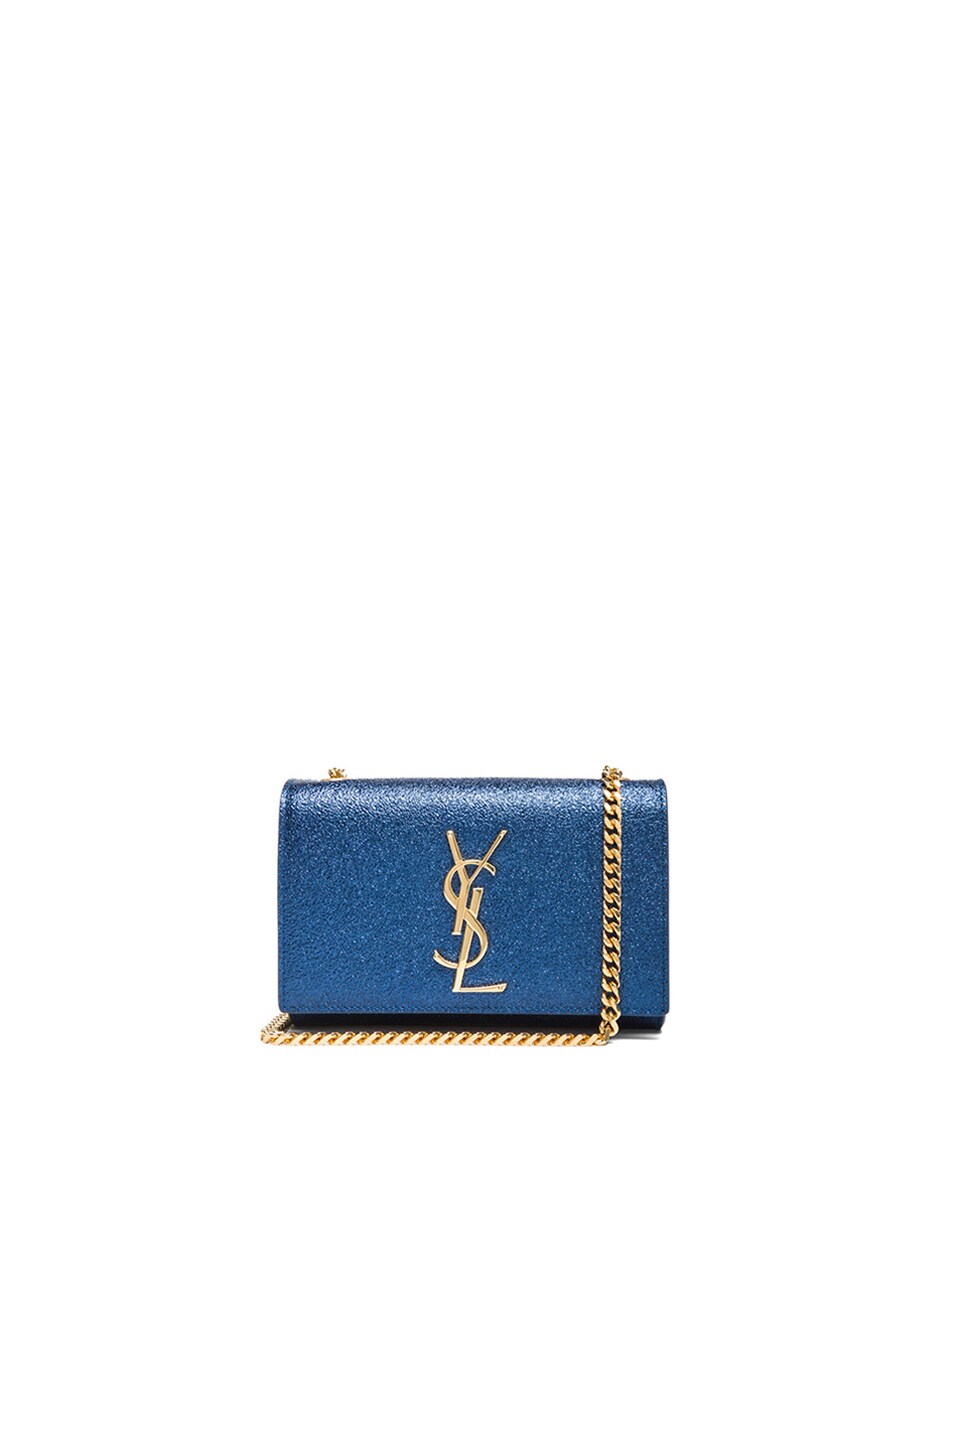 Image 1 of Saint Laurent Small Monogramme Chain Bag in Metallic Blue